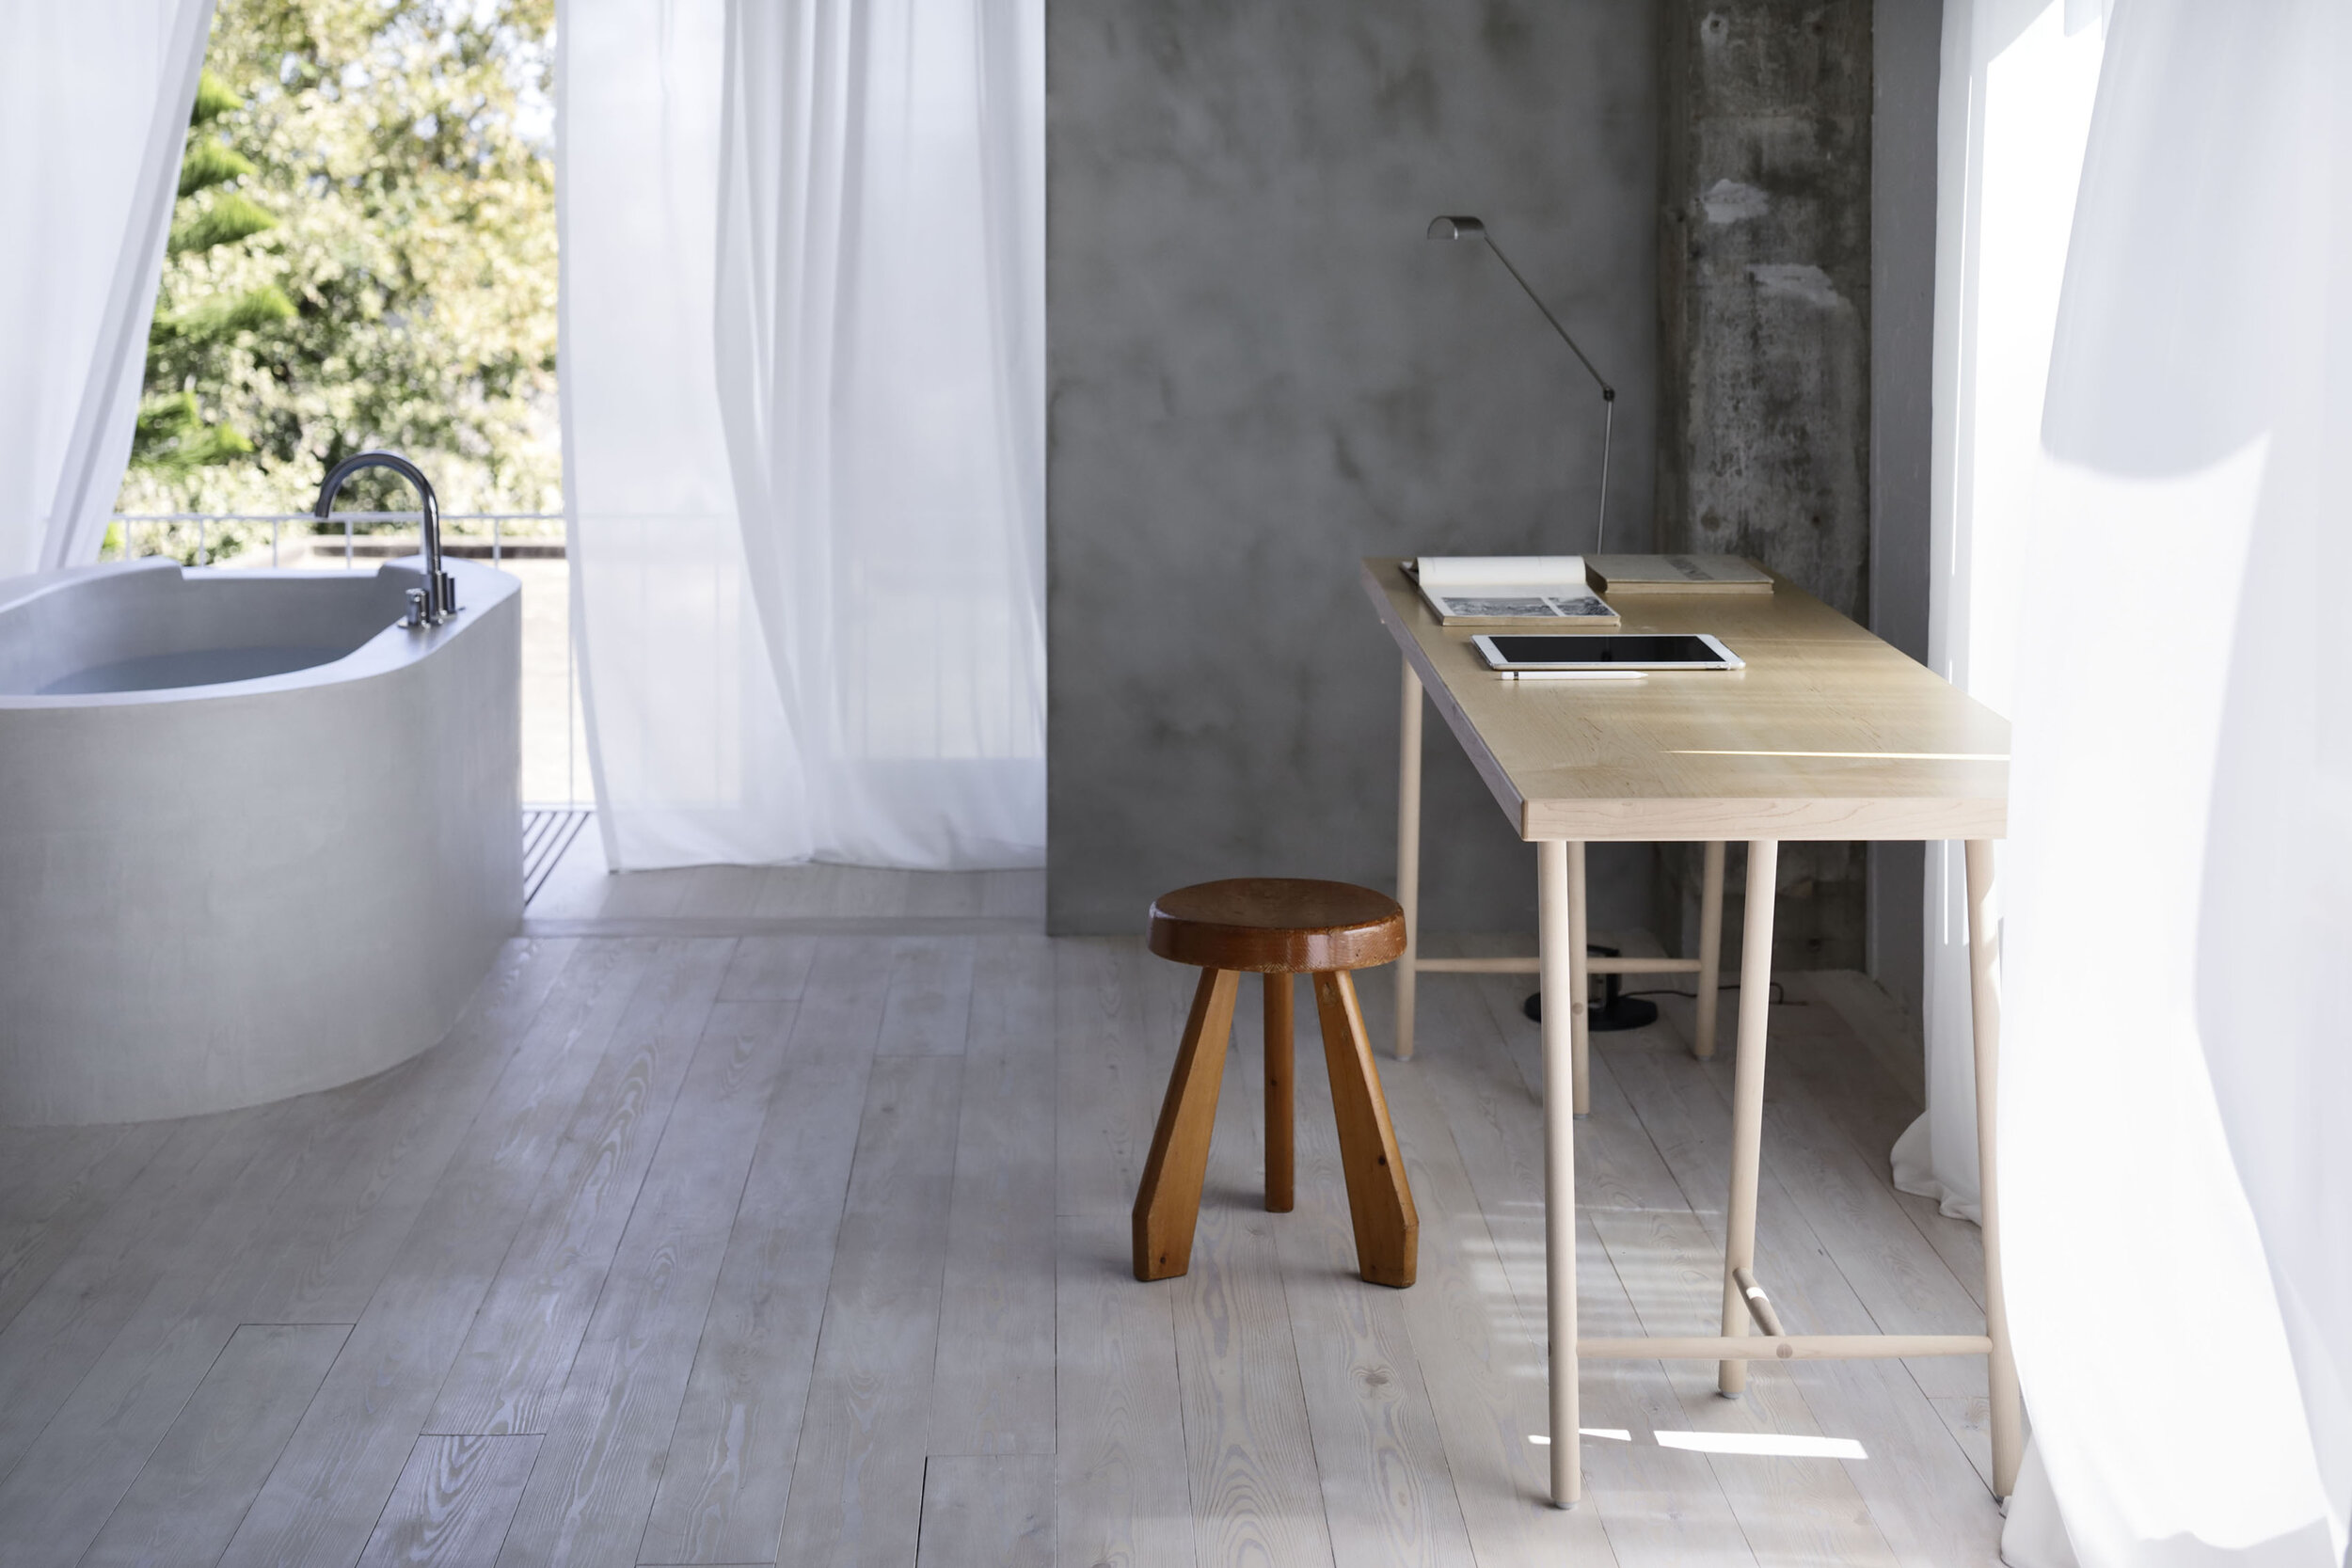  The vitage wooden stool was designed by Charlotte Perriand. 